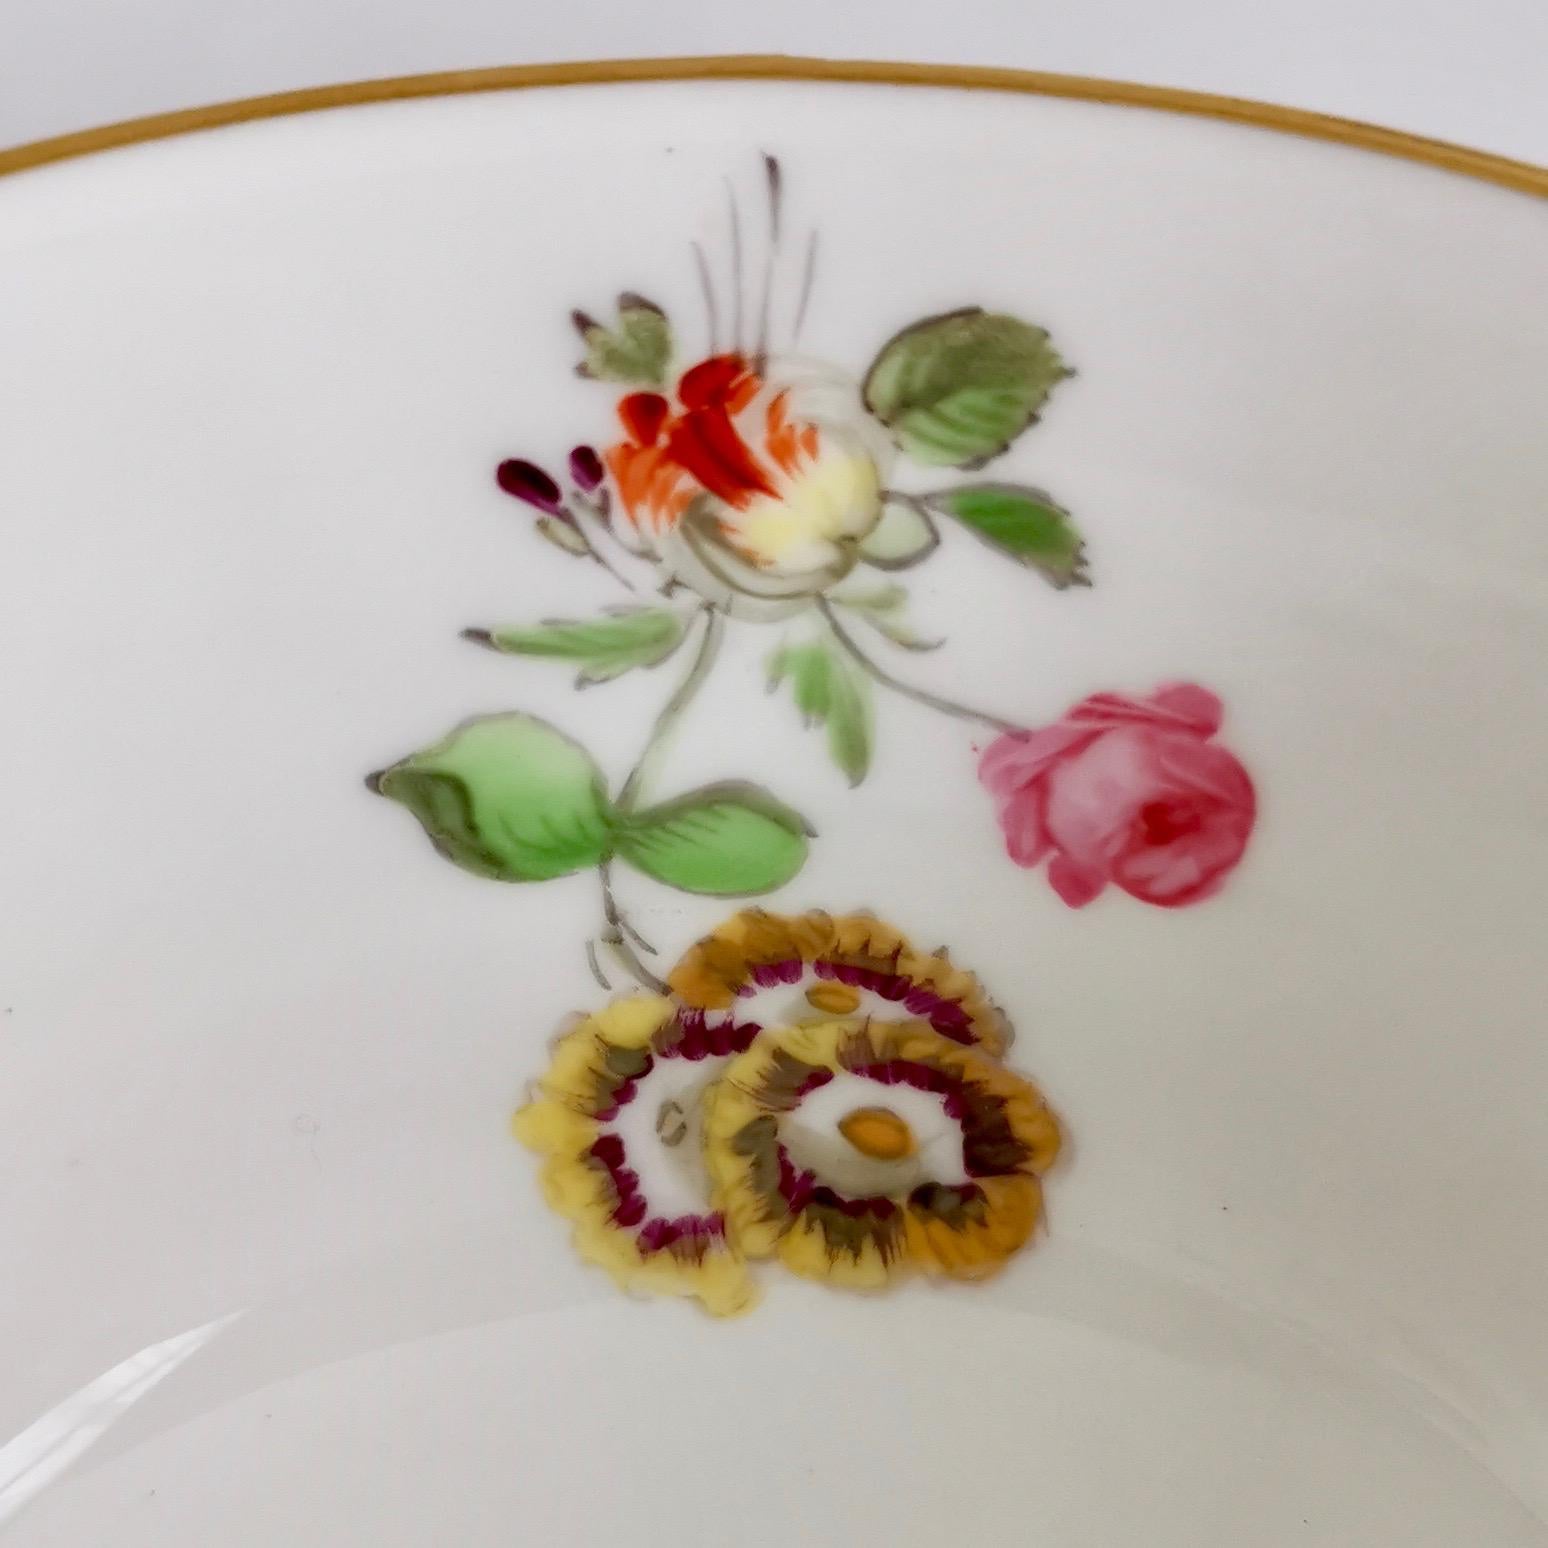 Davenport Porcelain Teacup, White with Hand Painted Flowers, circa 1820 6